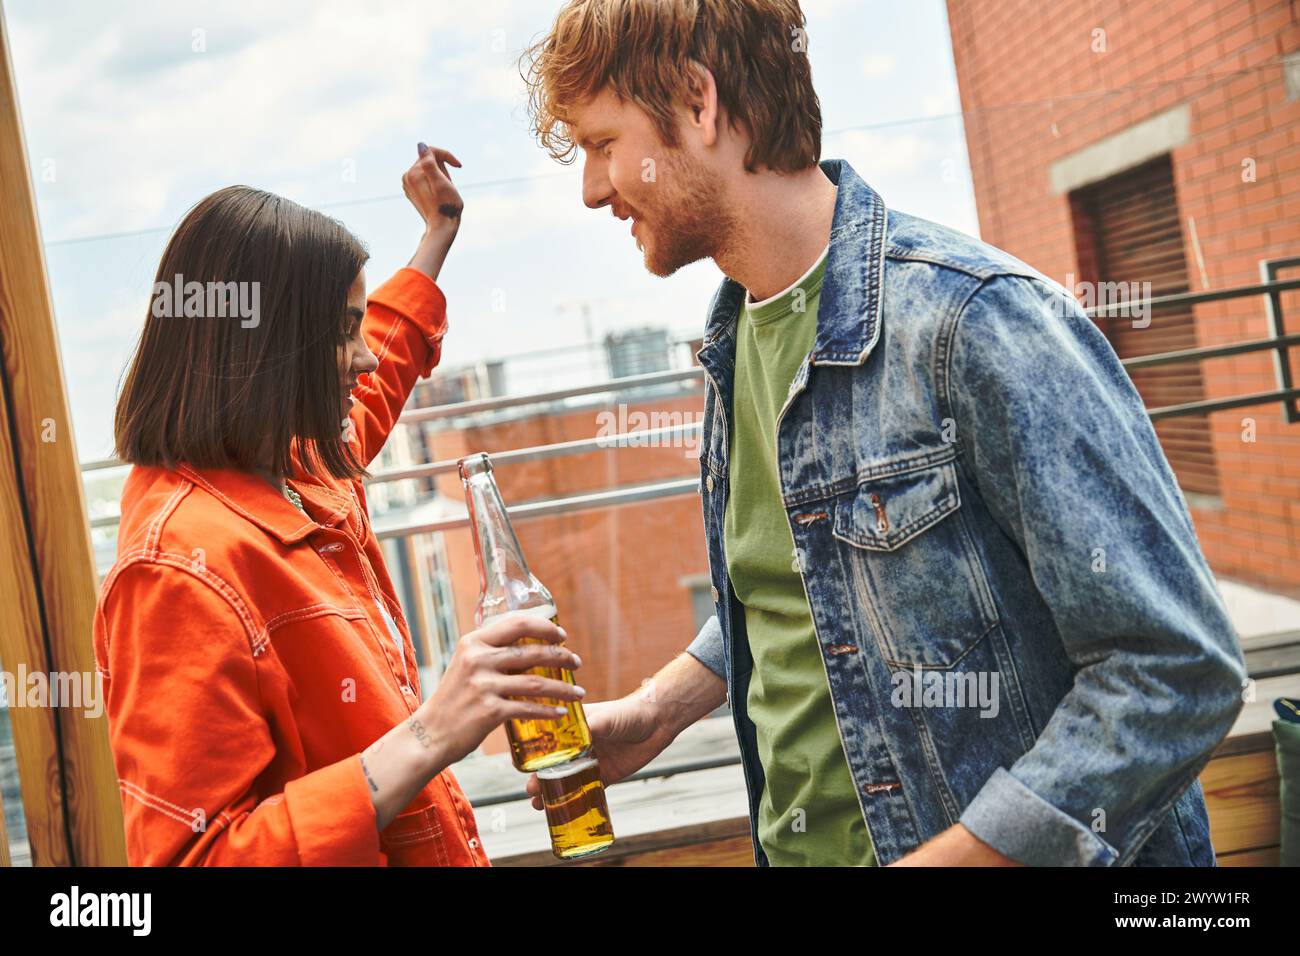 A man and a woman stand side by side, exuding a sense of unity and togetherness as they look ahead with a shared purpose Stock Photo